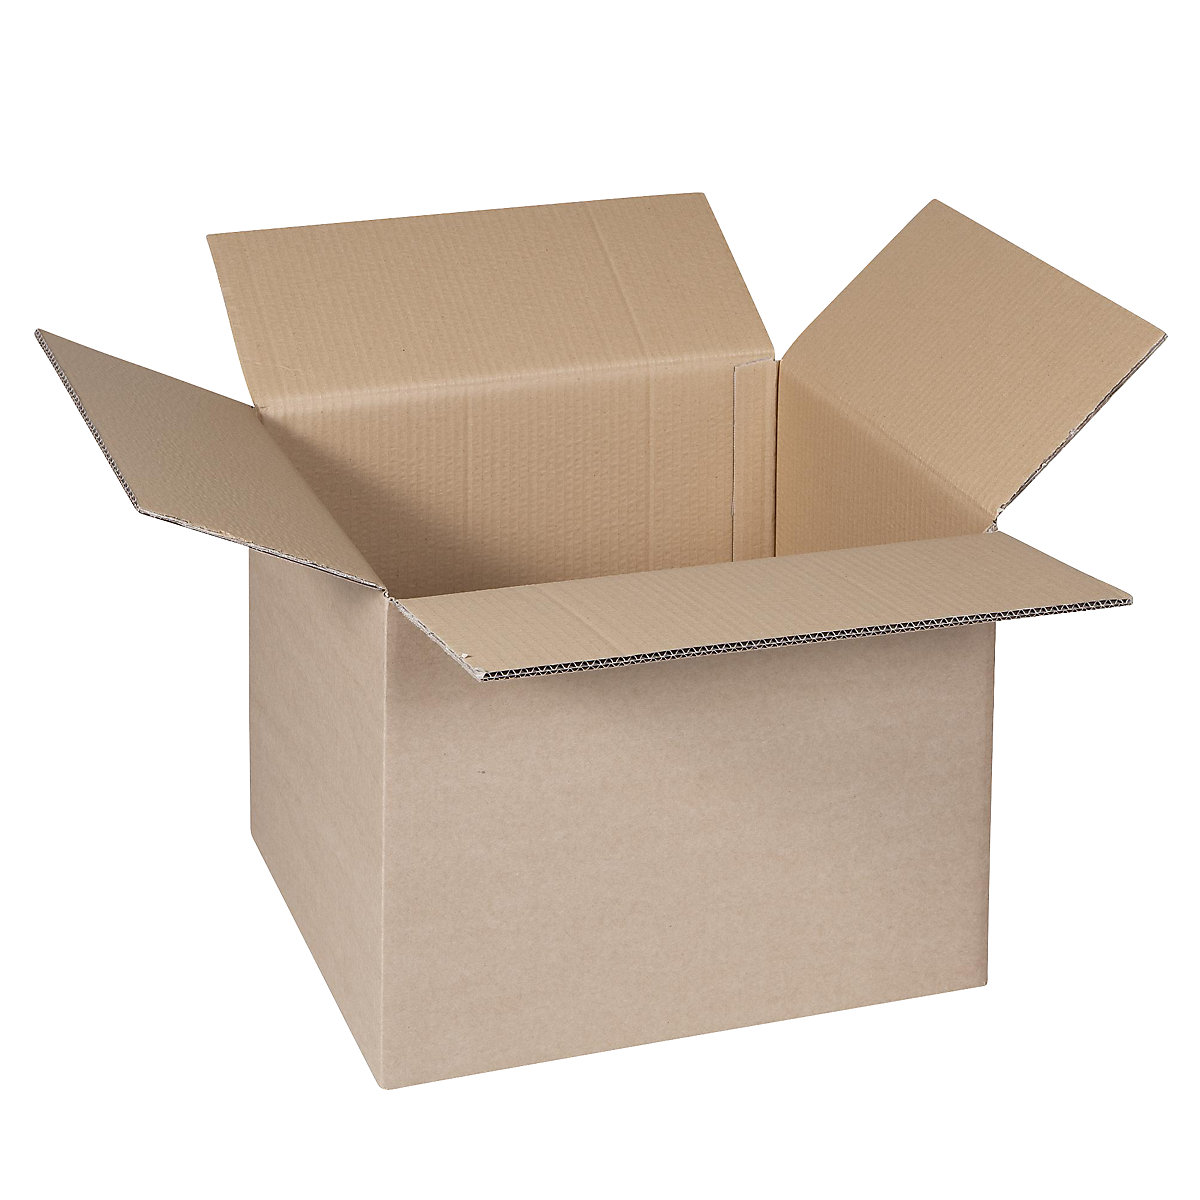 Folding cardboard box, FEFCO 0201, made of double fluted cardboard, internal dimensions 650 x 500 x 450 mm, pack of 100-19